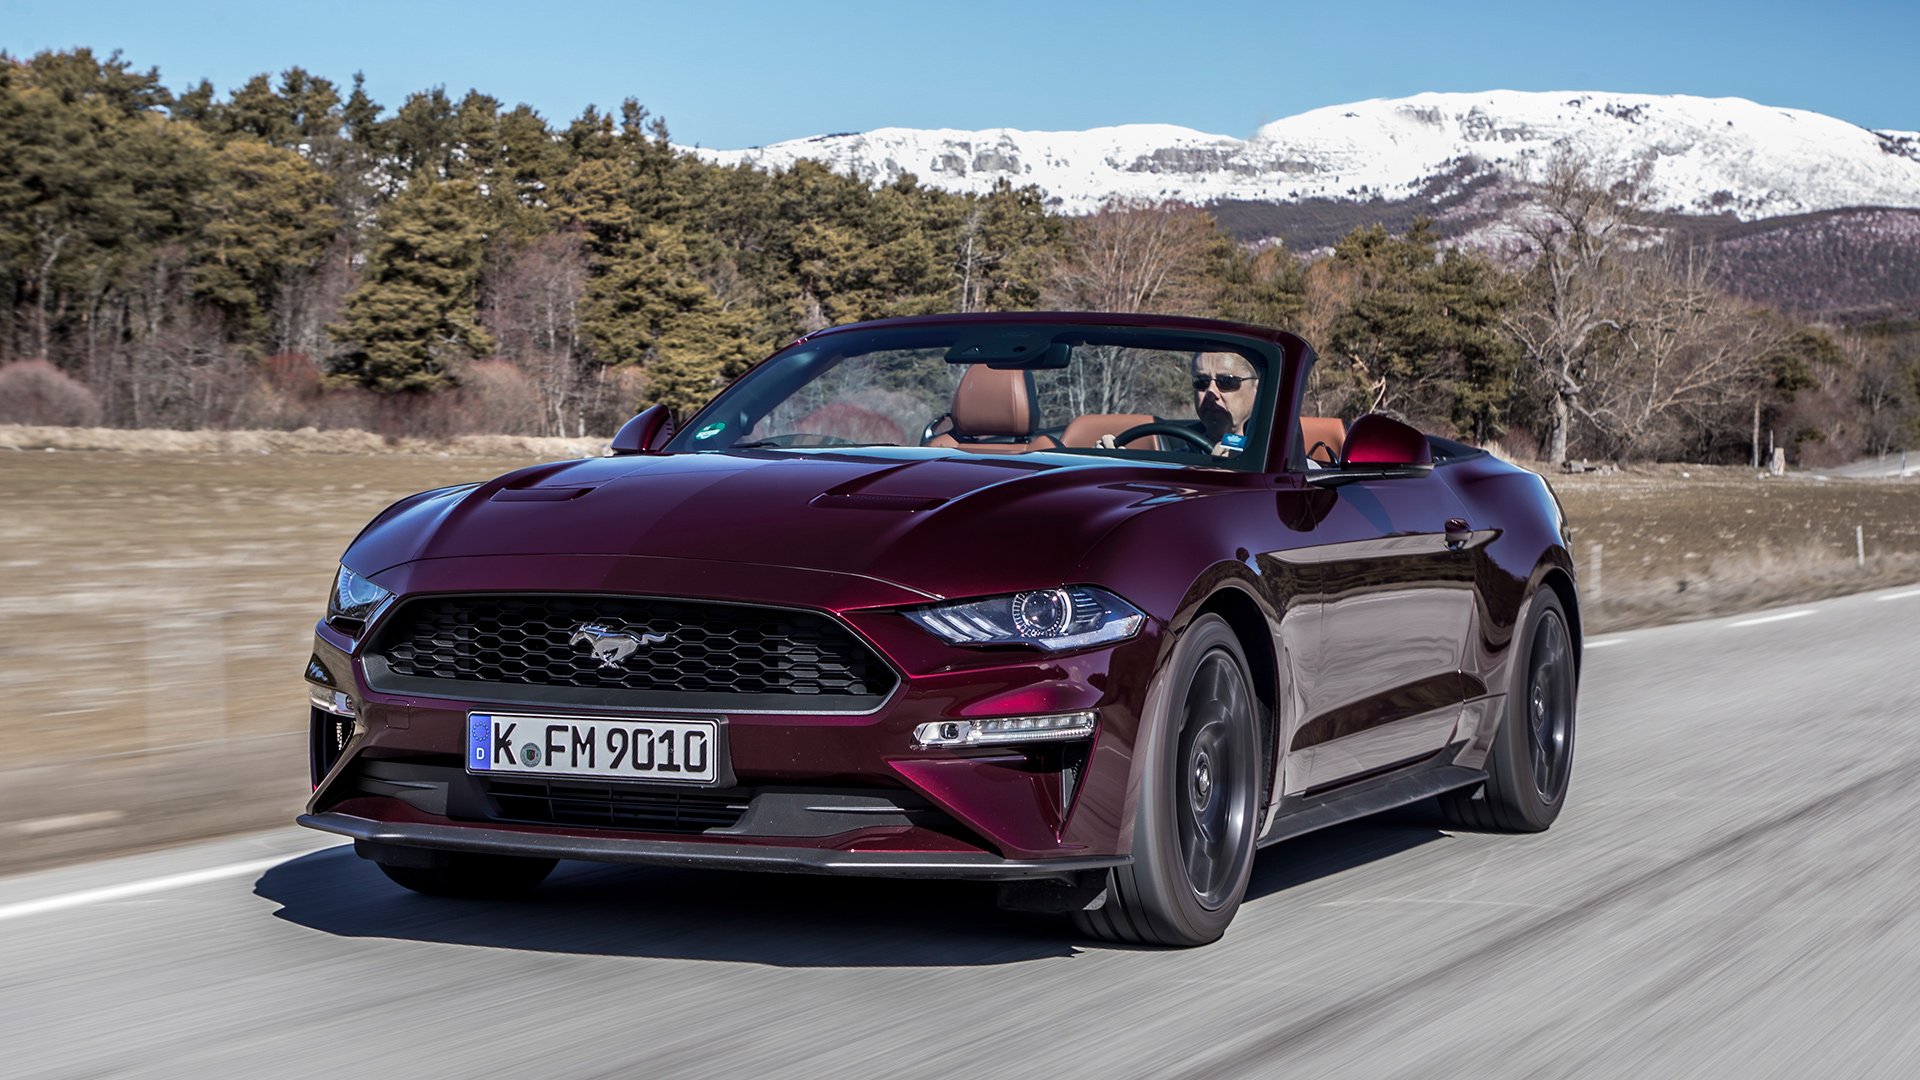 2020 Ford Mustang GT Convertible Always Feels Like Summer